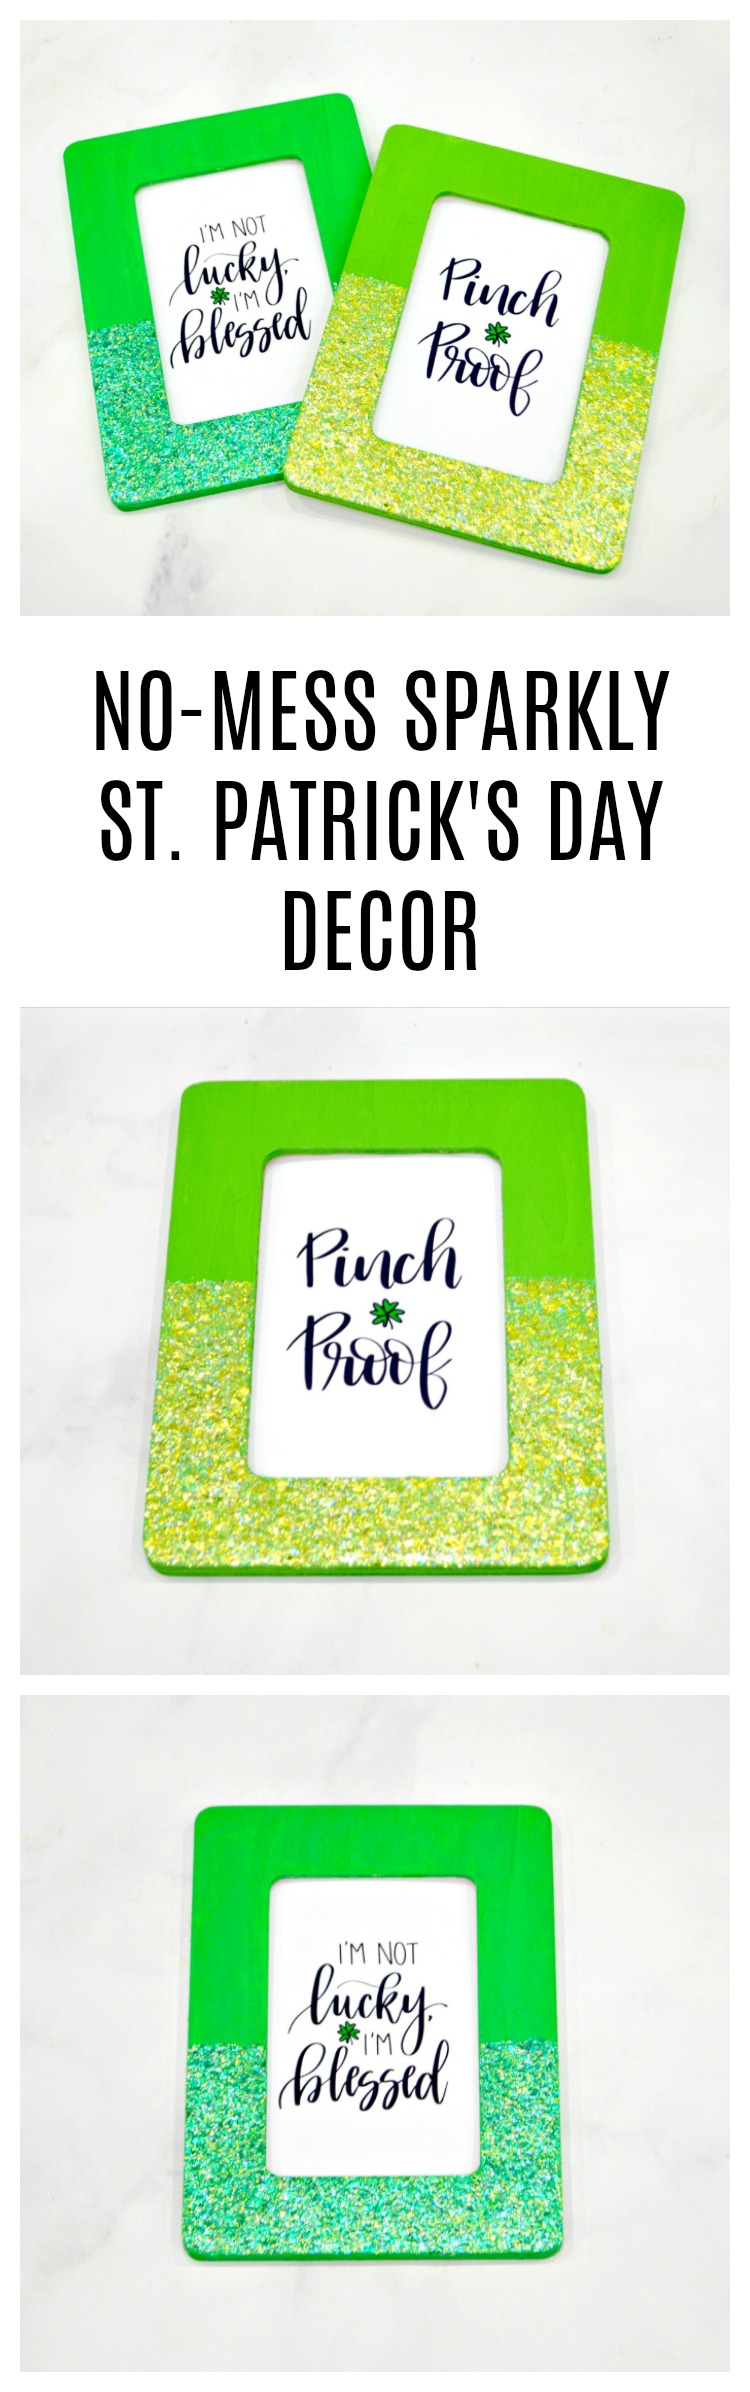 No-Mess Sparkly St. Patrick's Day Decor